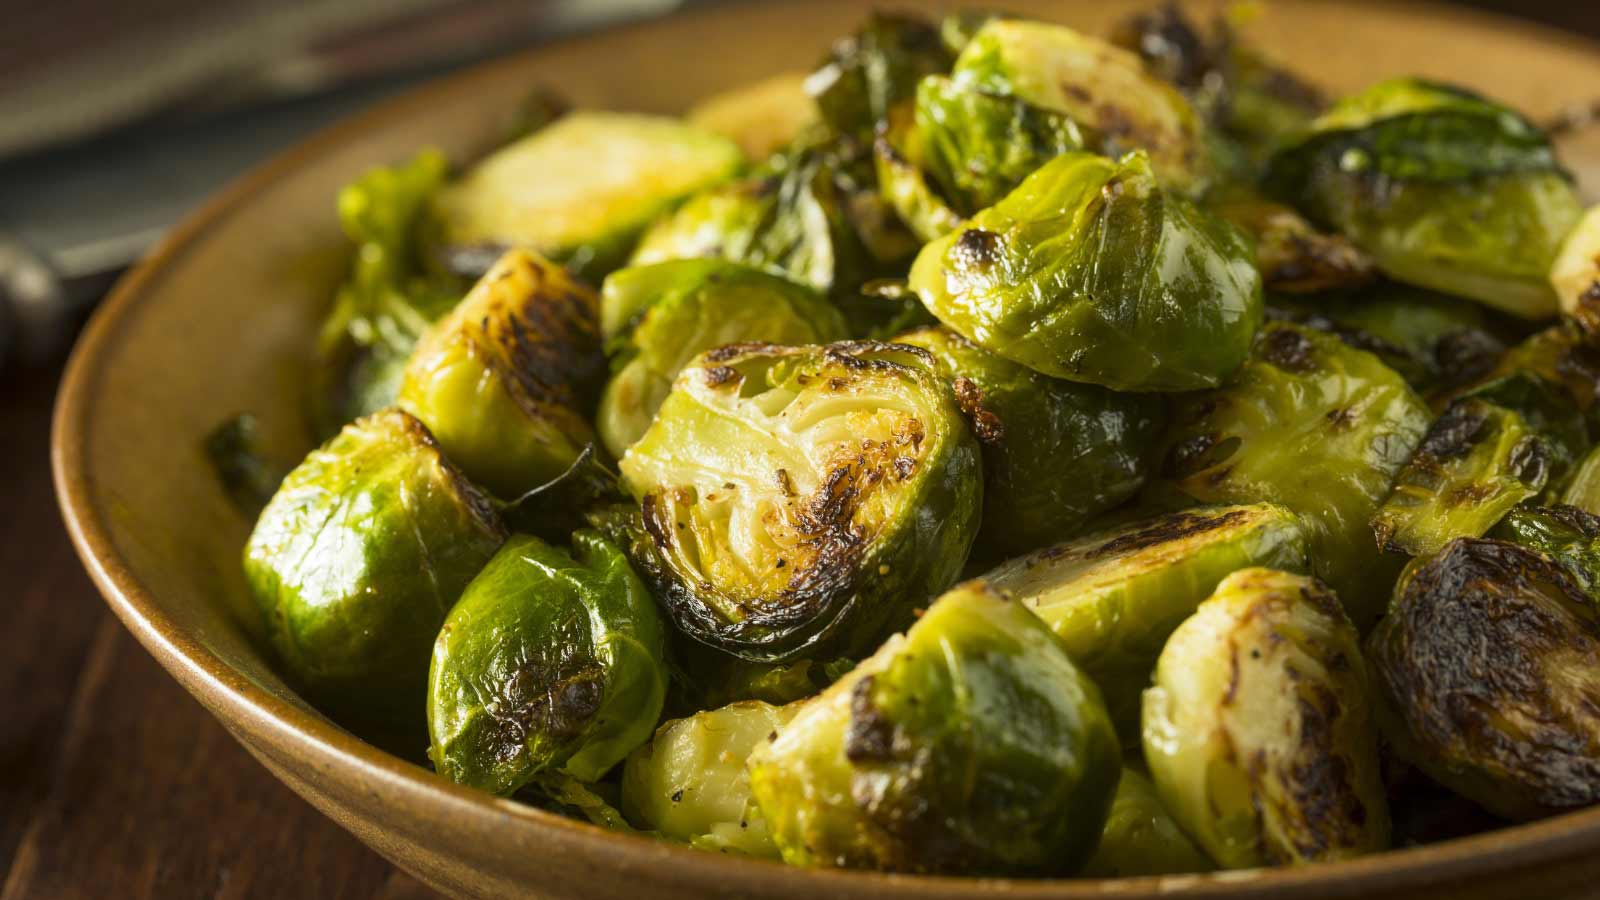 10 Unique Recipes For An Extra Bag of Brussels Sprouts